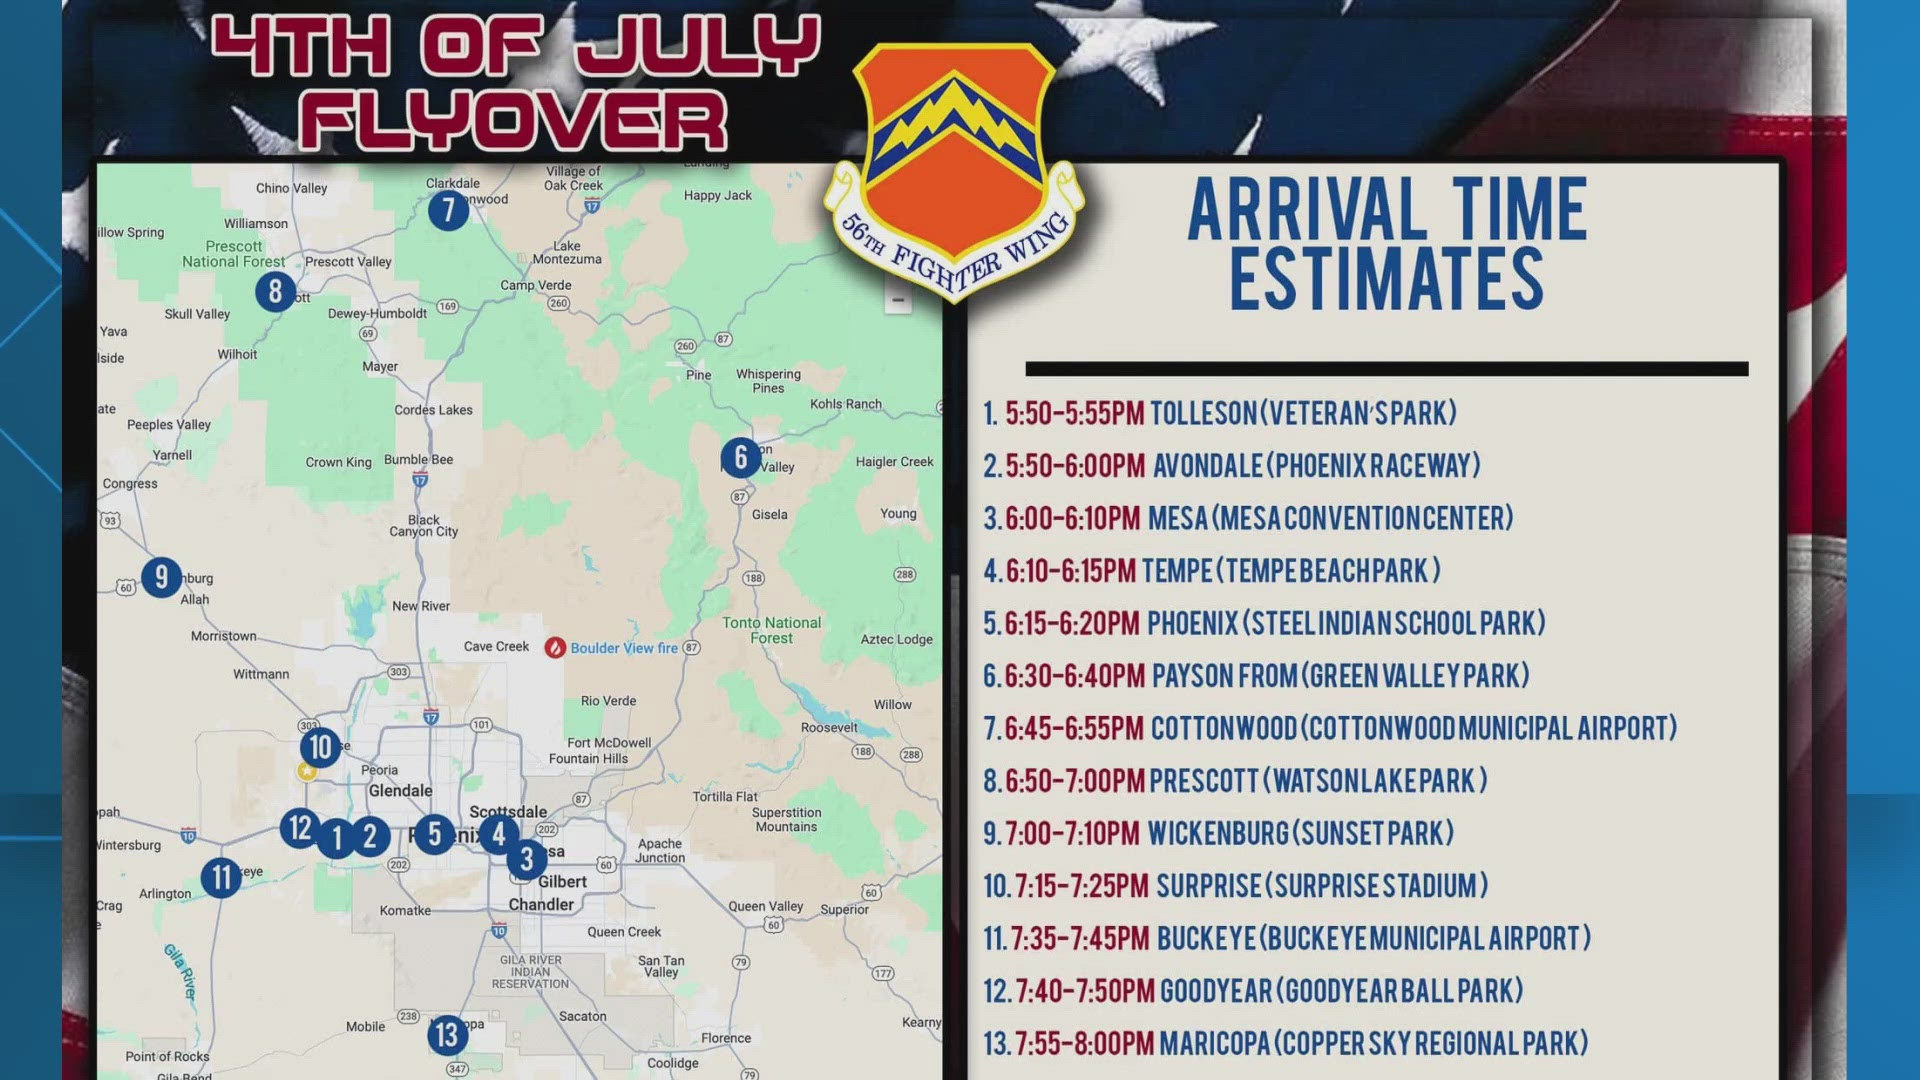 Several F-35 jets from Luke Air Force Base will be conducting a flyover on the Independence Day holiday.